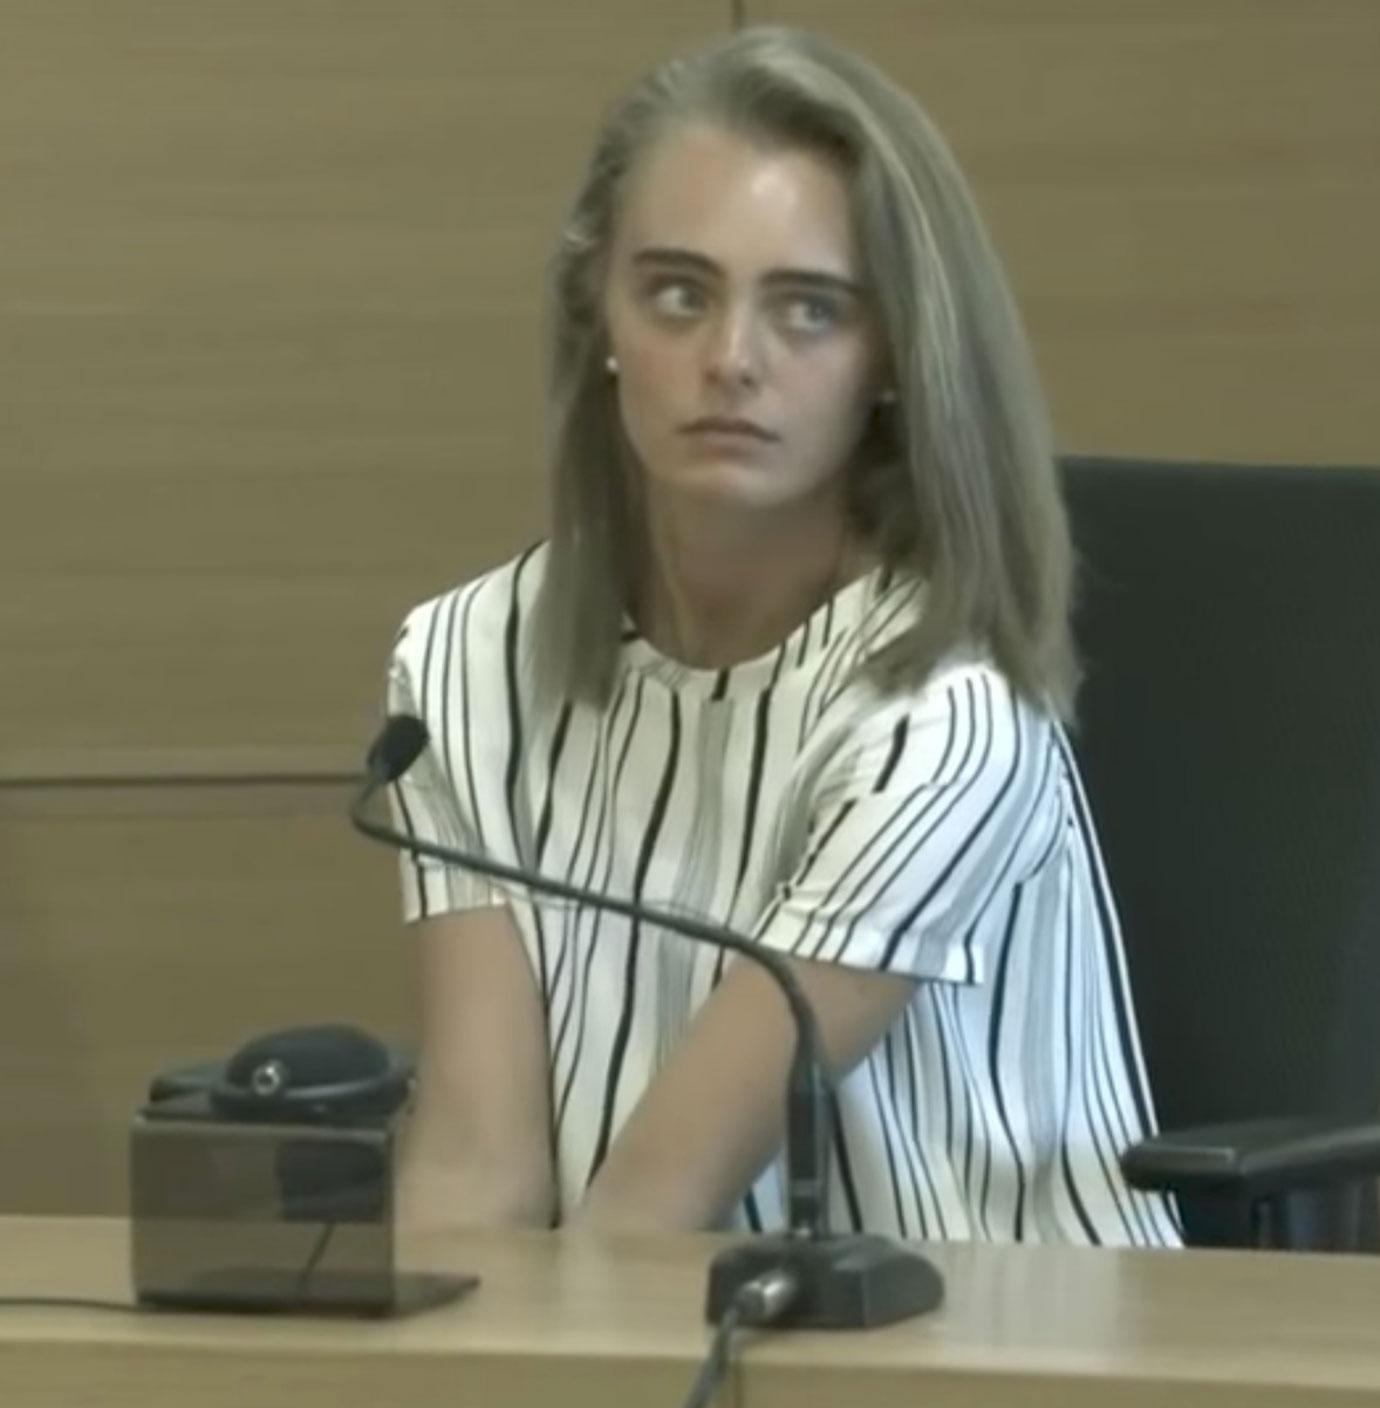 Video Teen Text Killer Trial Of Michelle Carter Conrad Roy Death By Suicide Photos